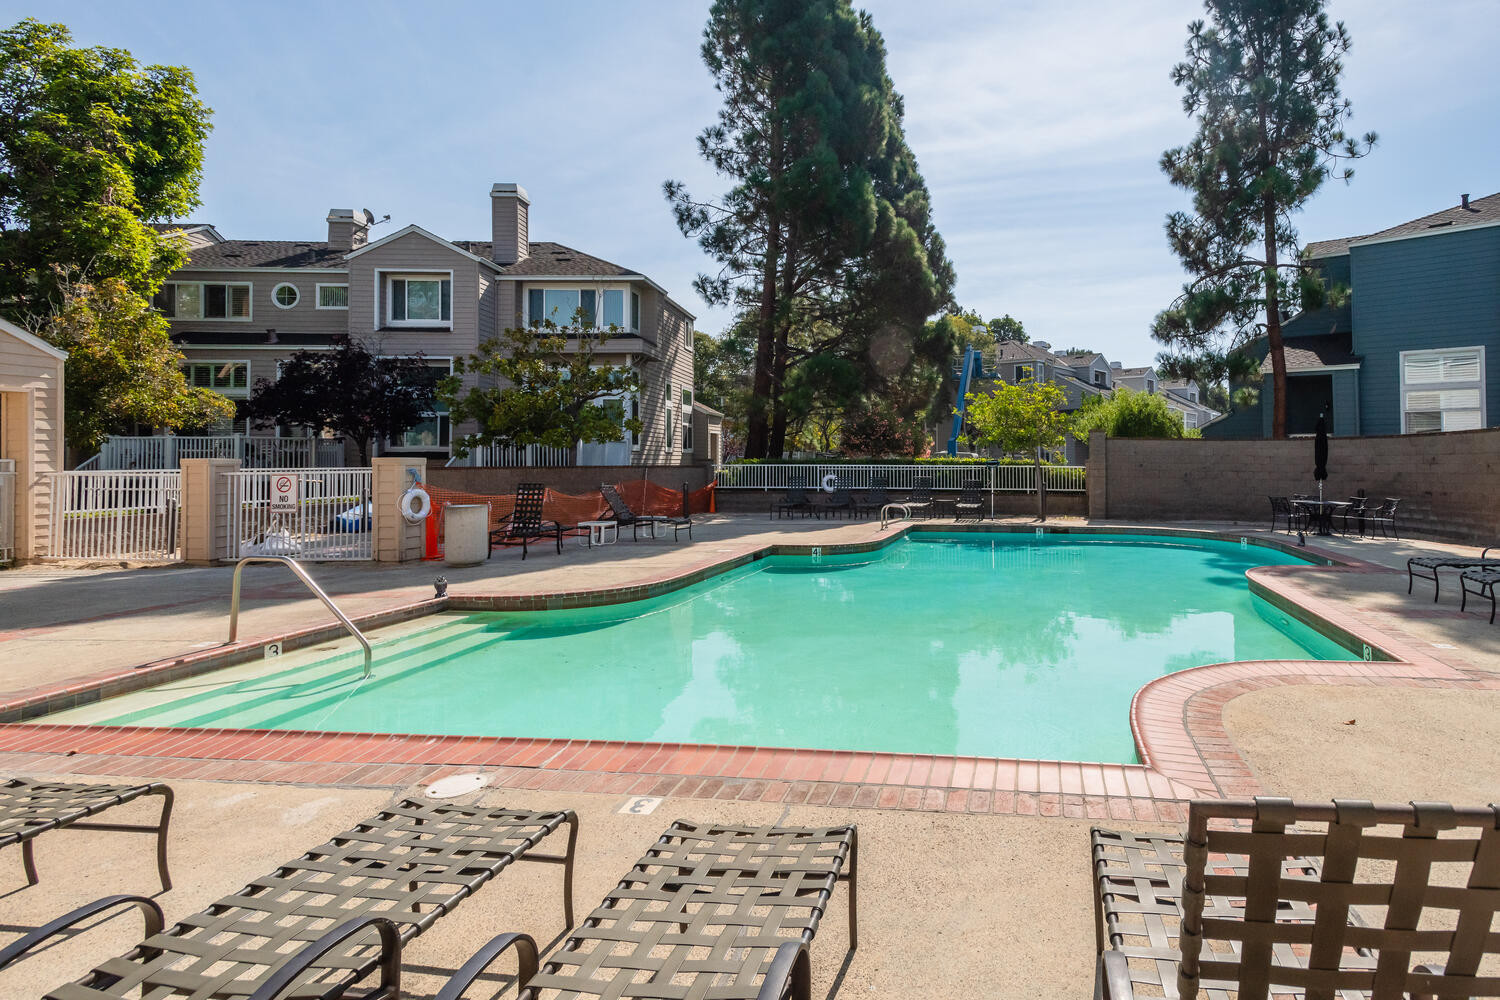 Swimming pool in Lighthouse Cove area in Redwood Shores.